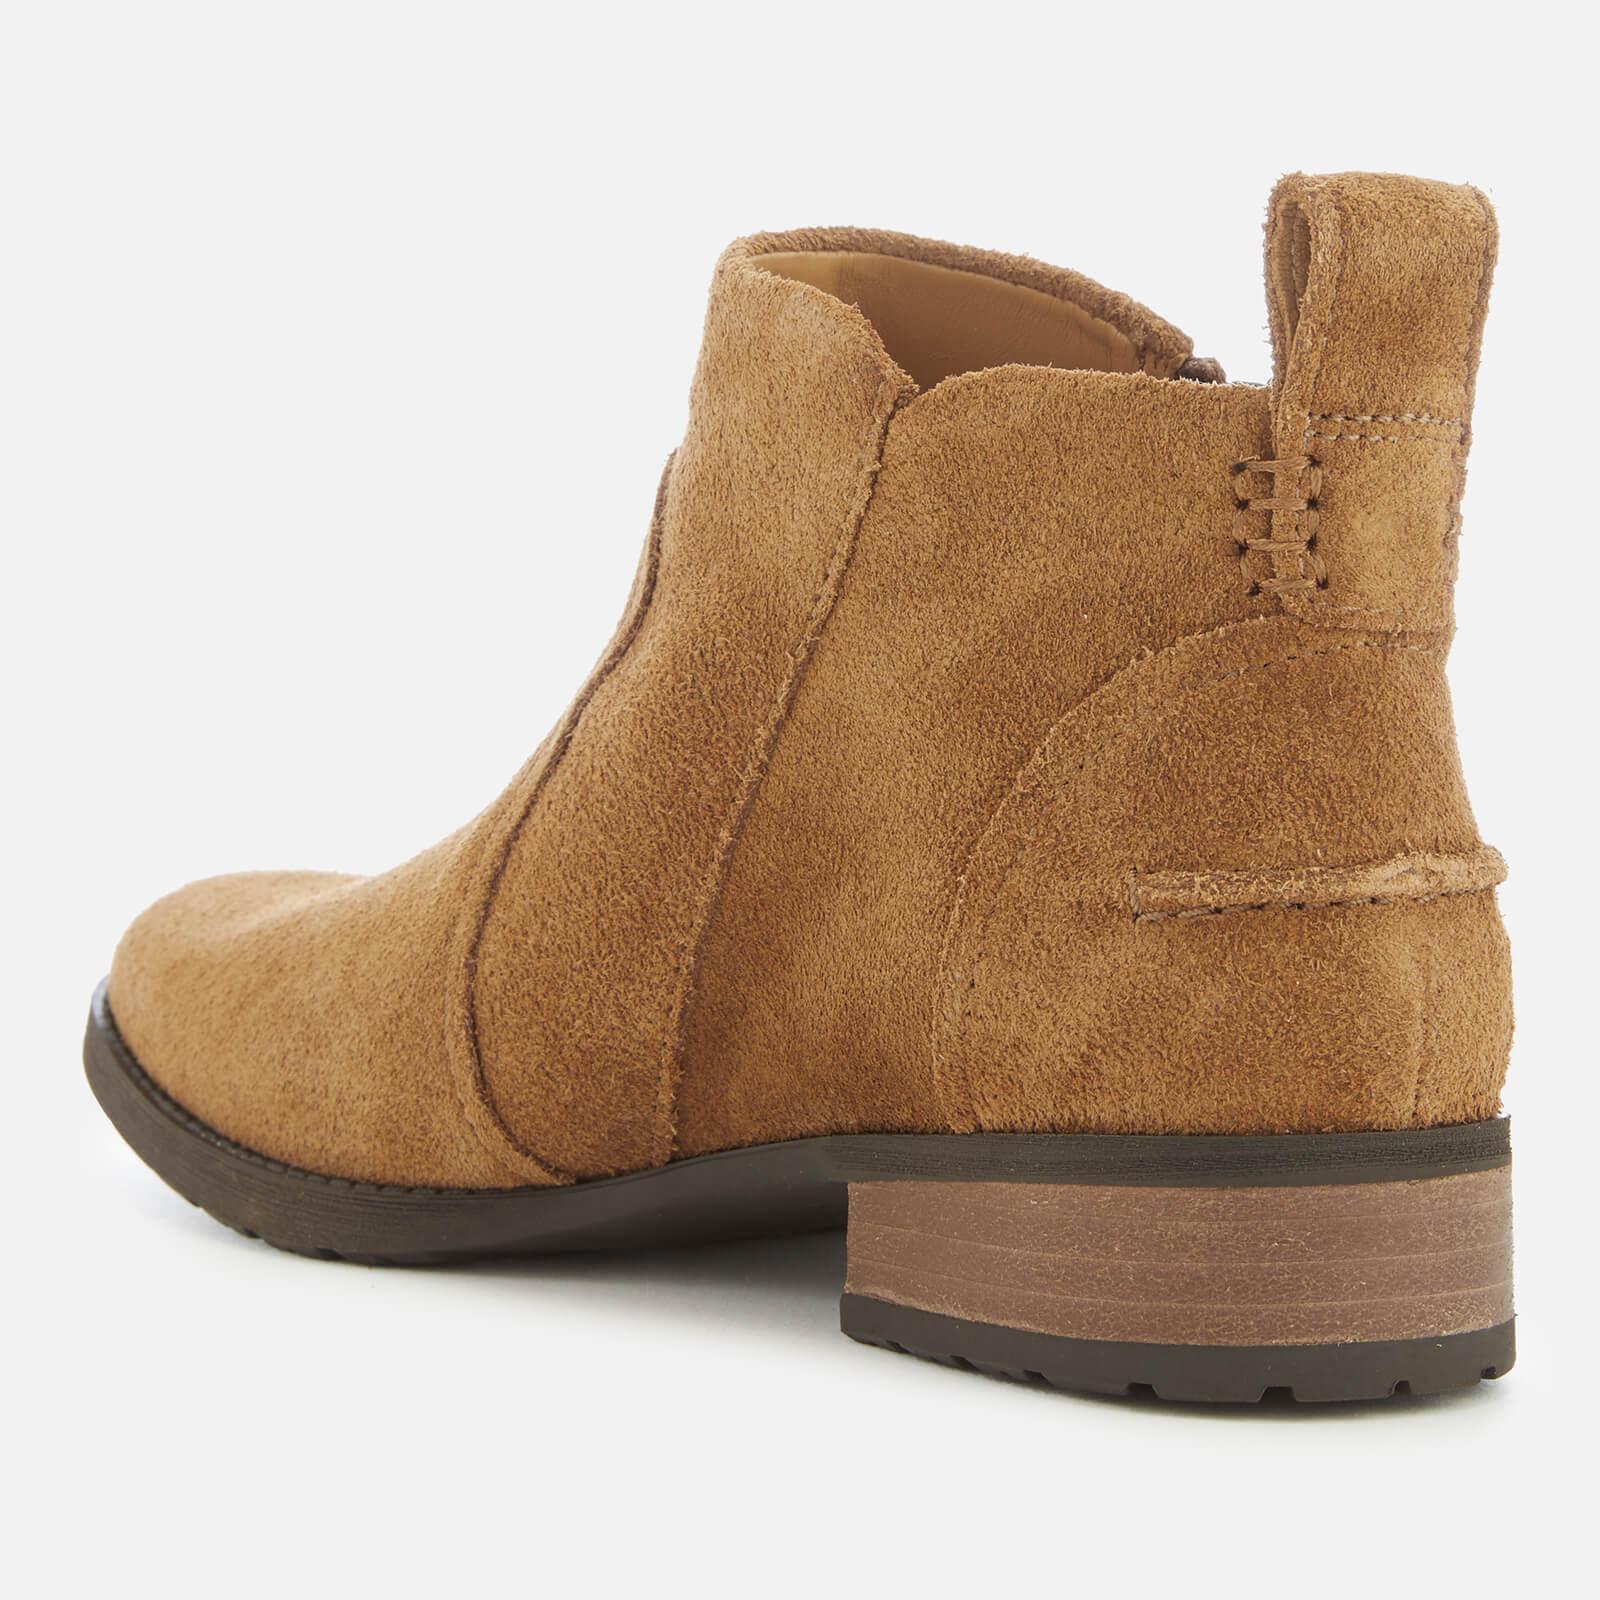 UGG Aureo Suede Flat Ankle Boots in Tan (Brown) - Lyst